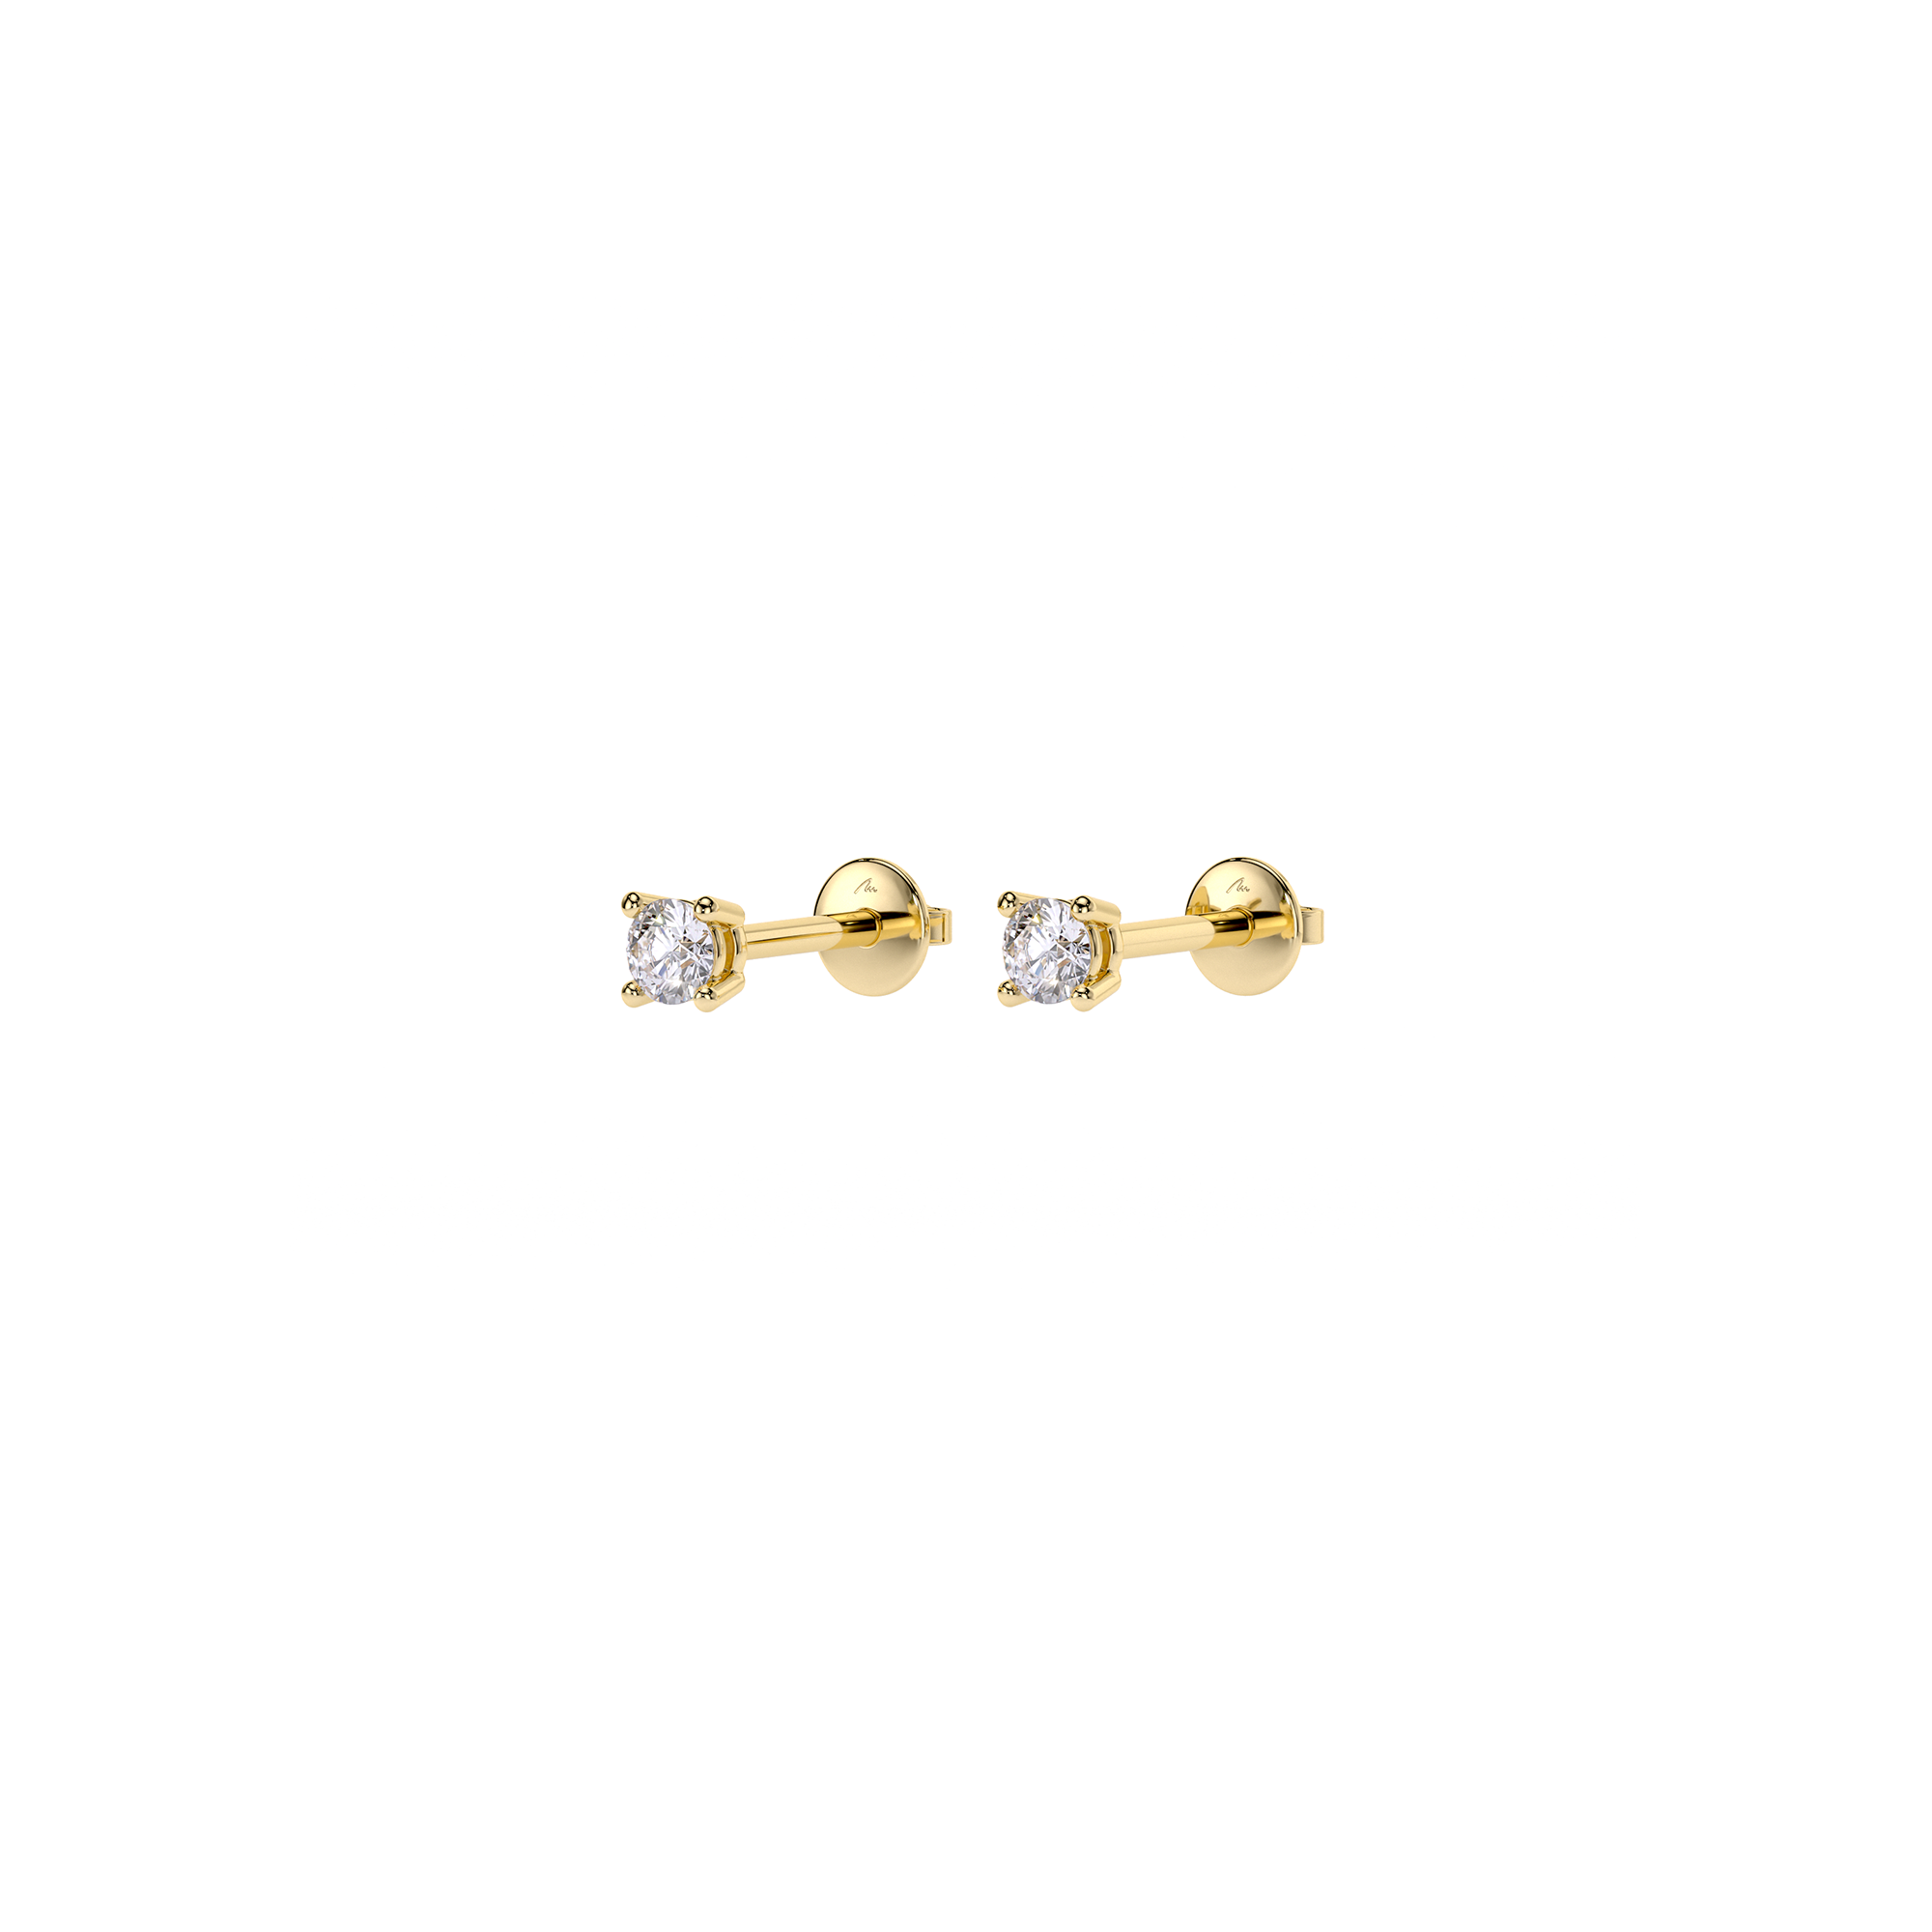 14 K yellow gold Studs earrings with 0.20  CT Lab Diamonds